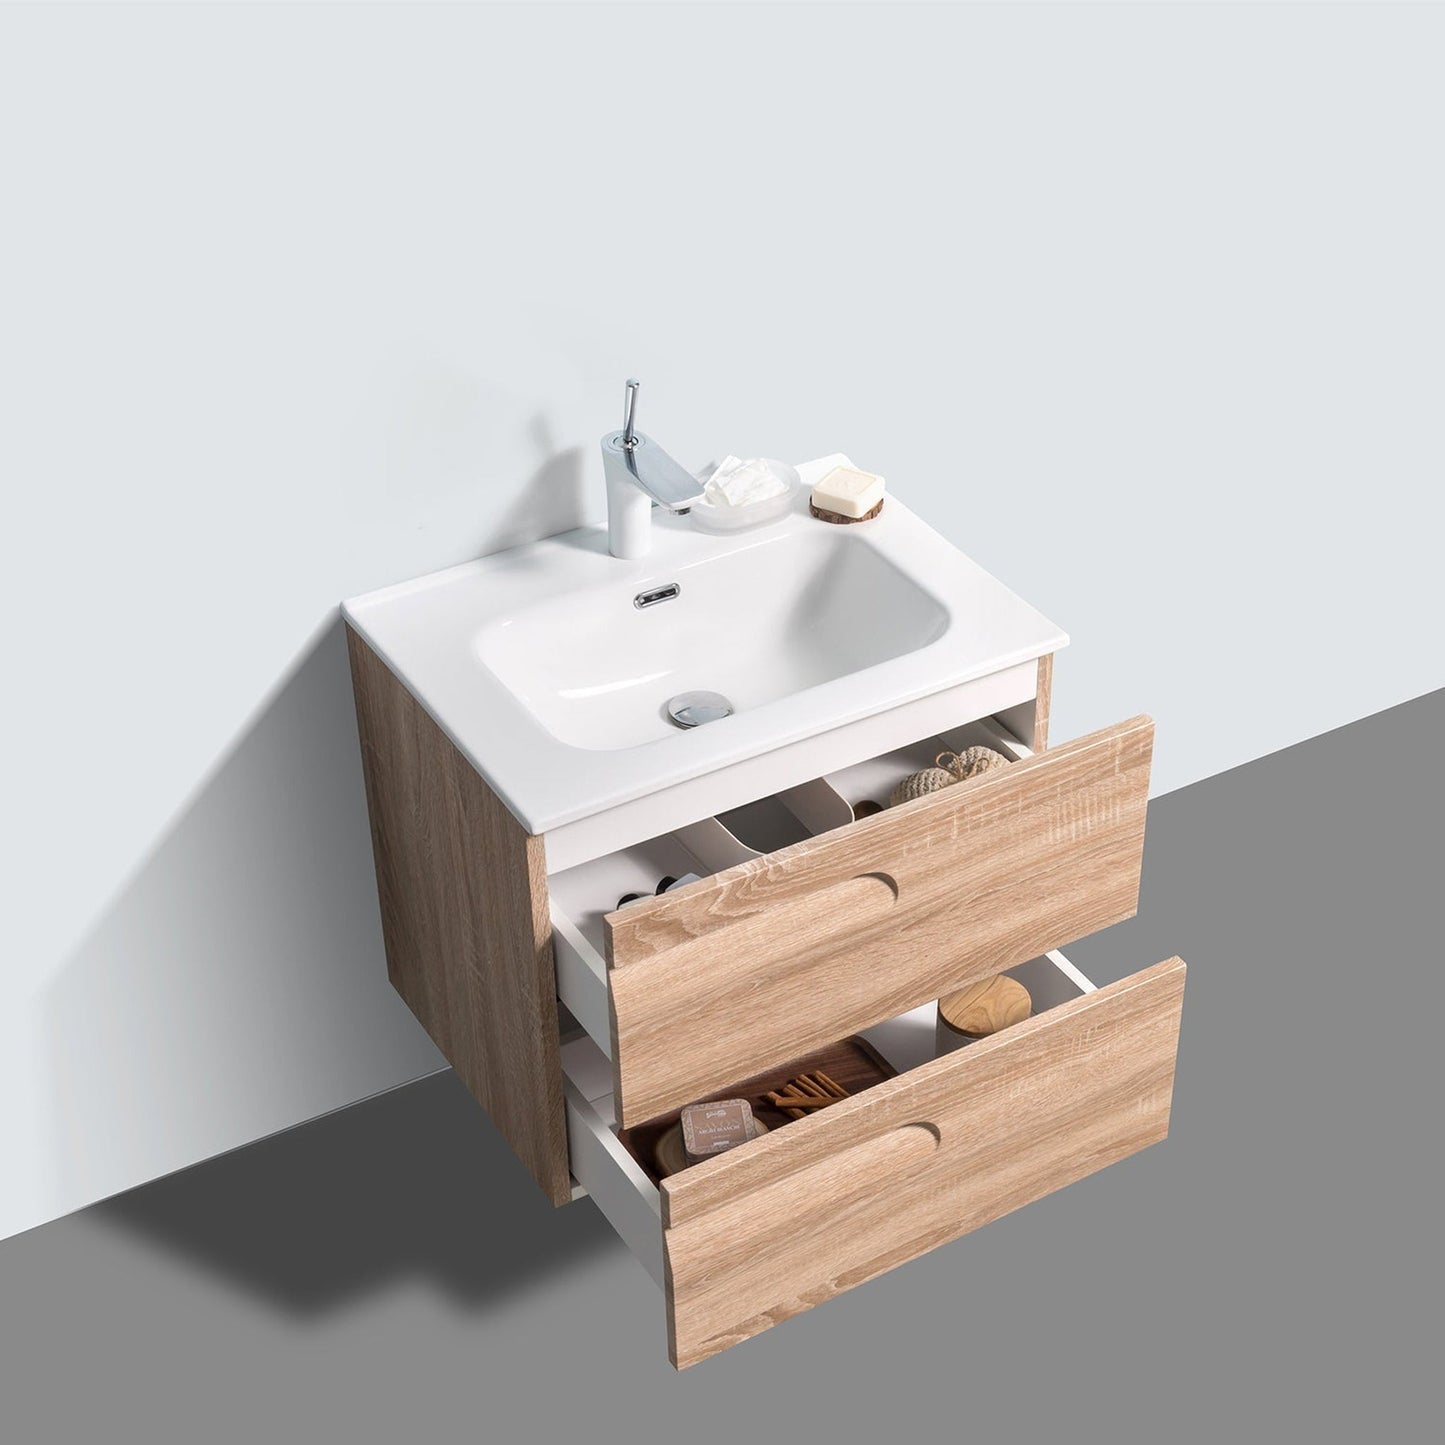 Eviva Joy 24" x 21" Maple Wall-Mounted Bathroom Vanity With White Integrated Sink